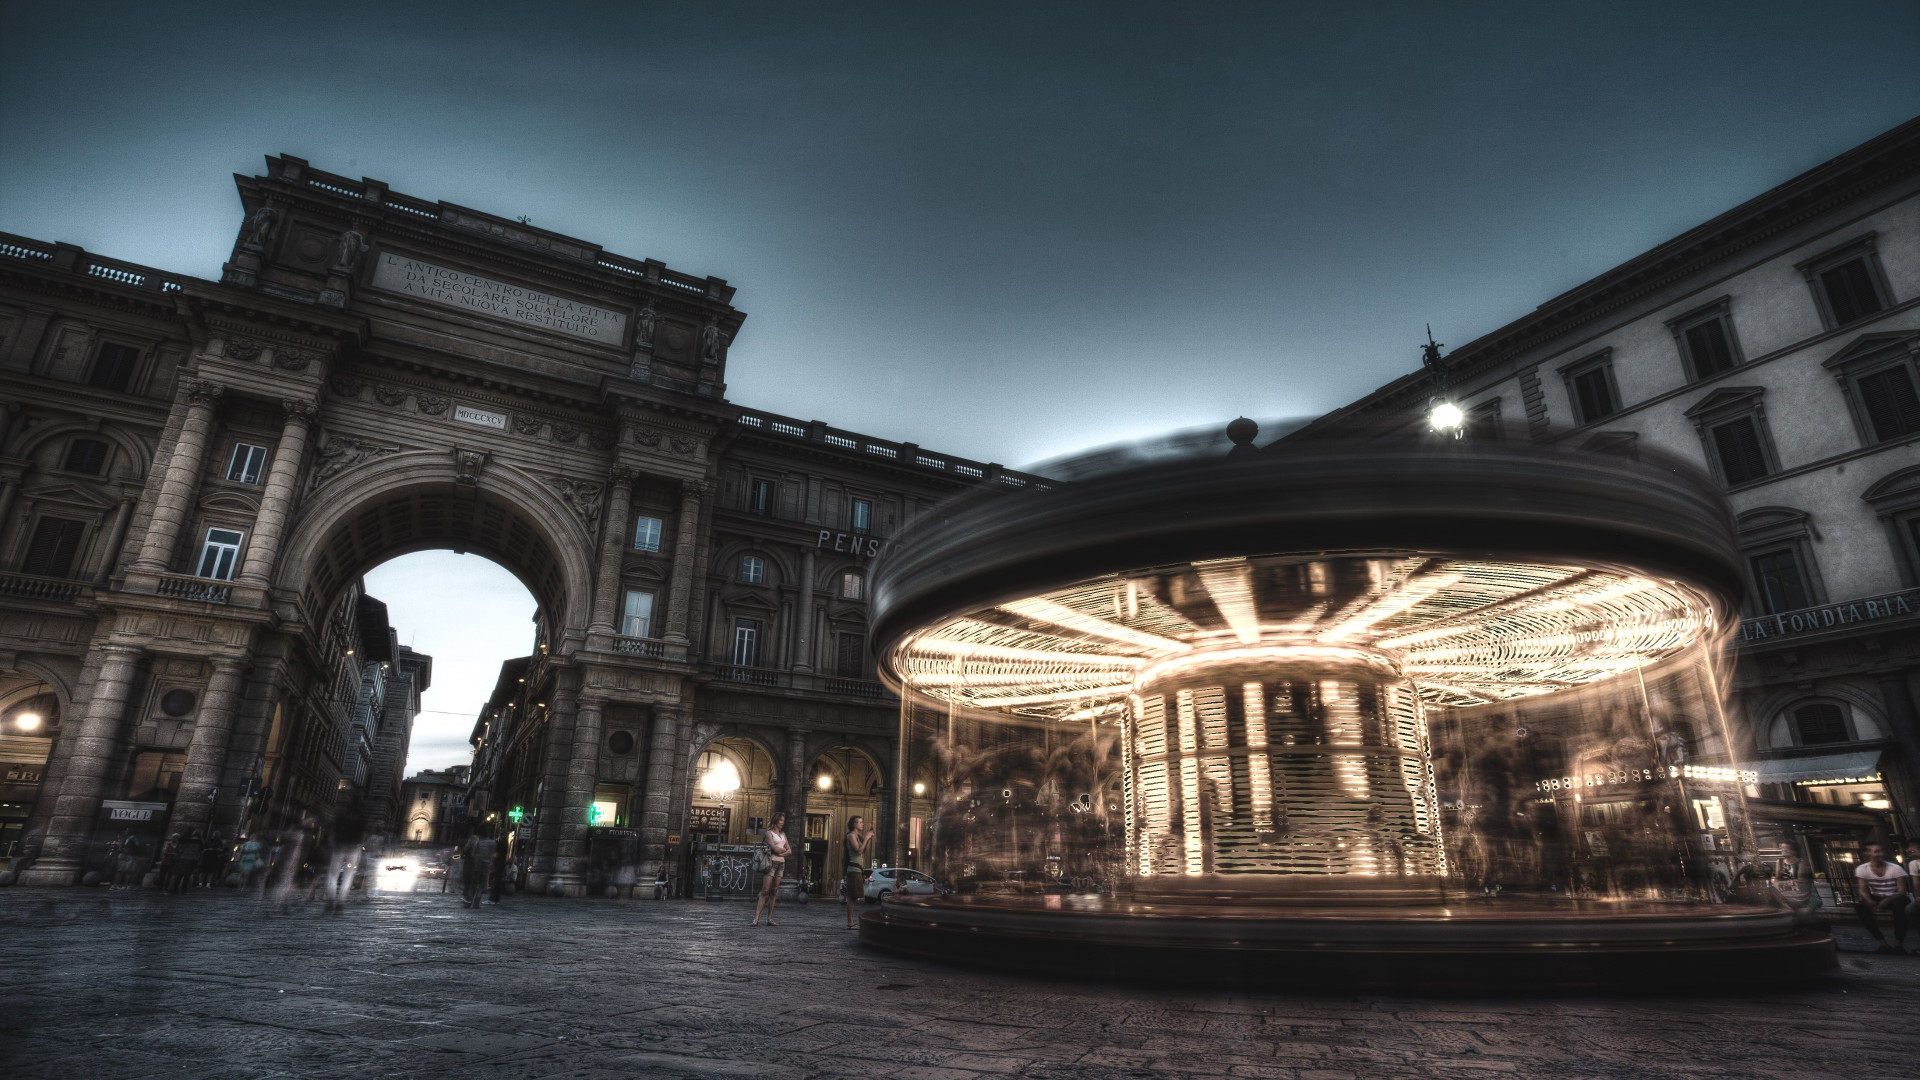 Carousel, people and buildings from Florence wallpaper 1920x1080